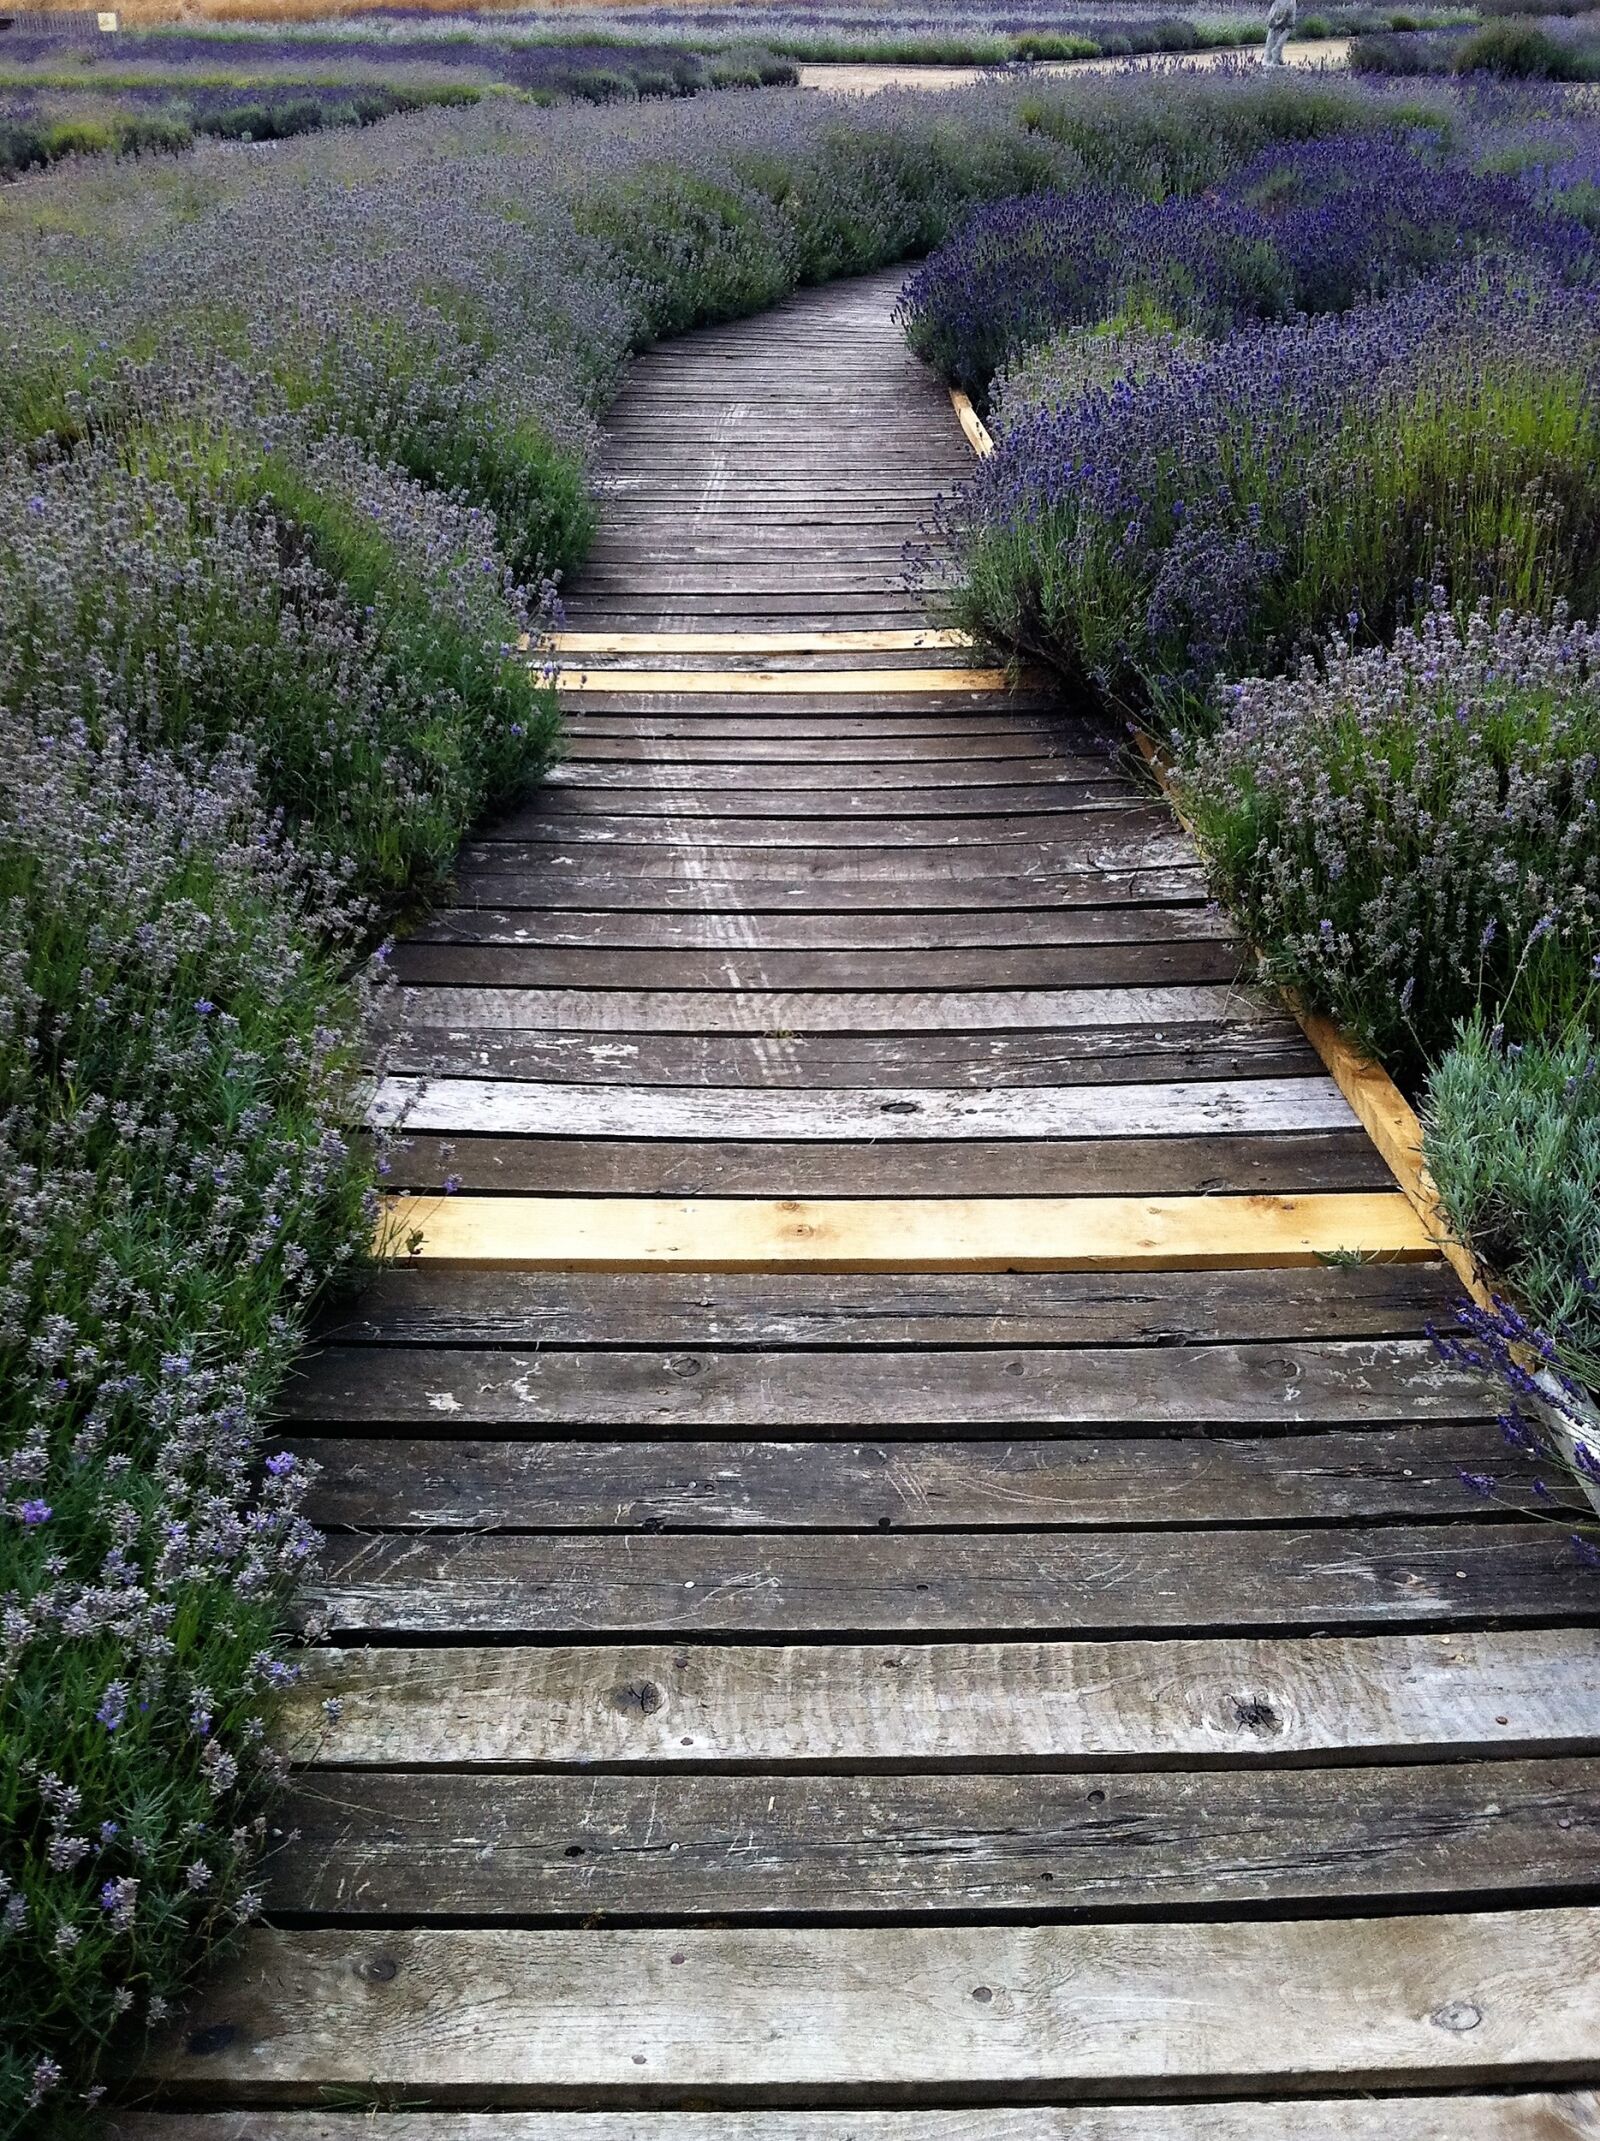 Apple iPhone 4 + iPhone 4 back camera 3.85mm f/2.8 sample photo. Path, lavender, wood planks photography